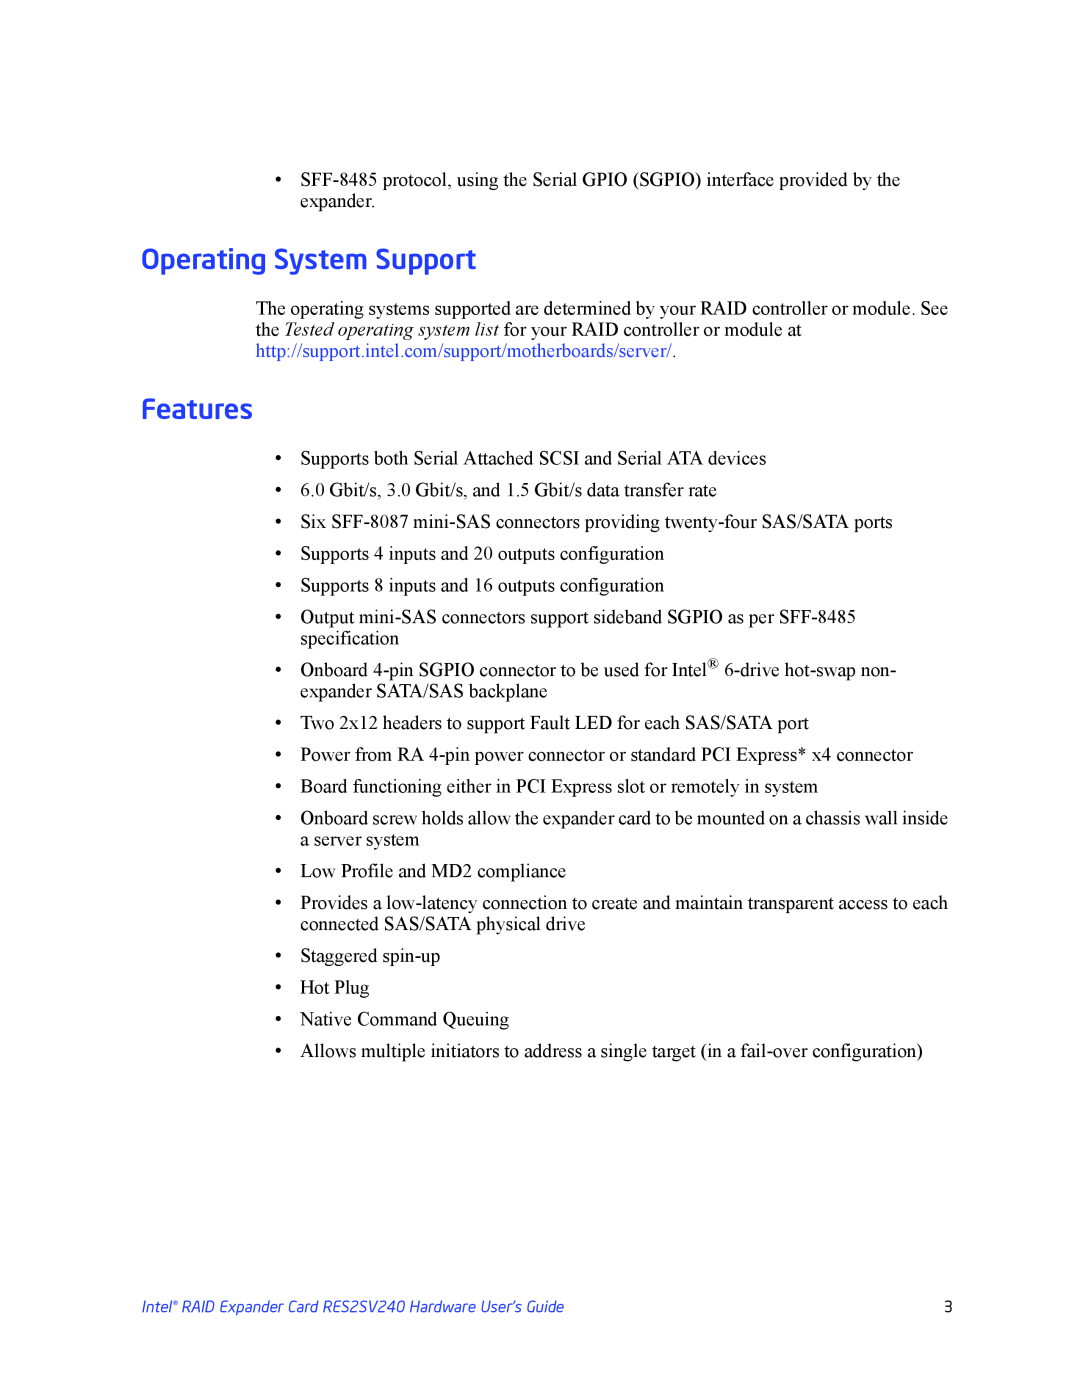 Intel RES2SV240 manual Operating System Support, Features 